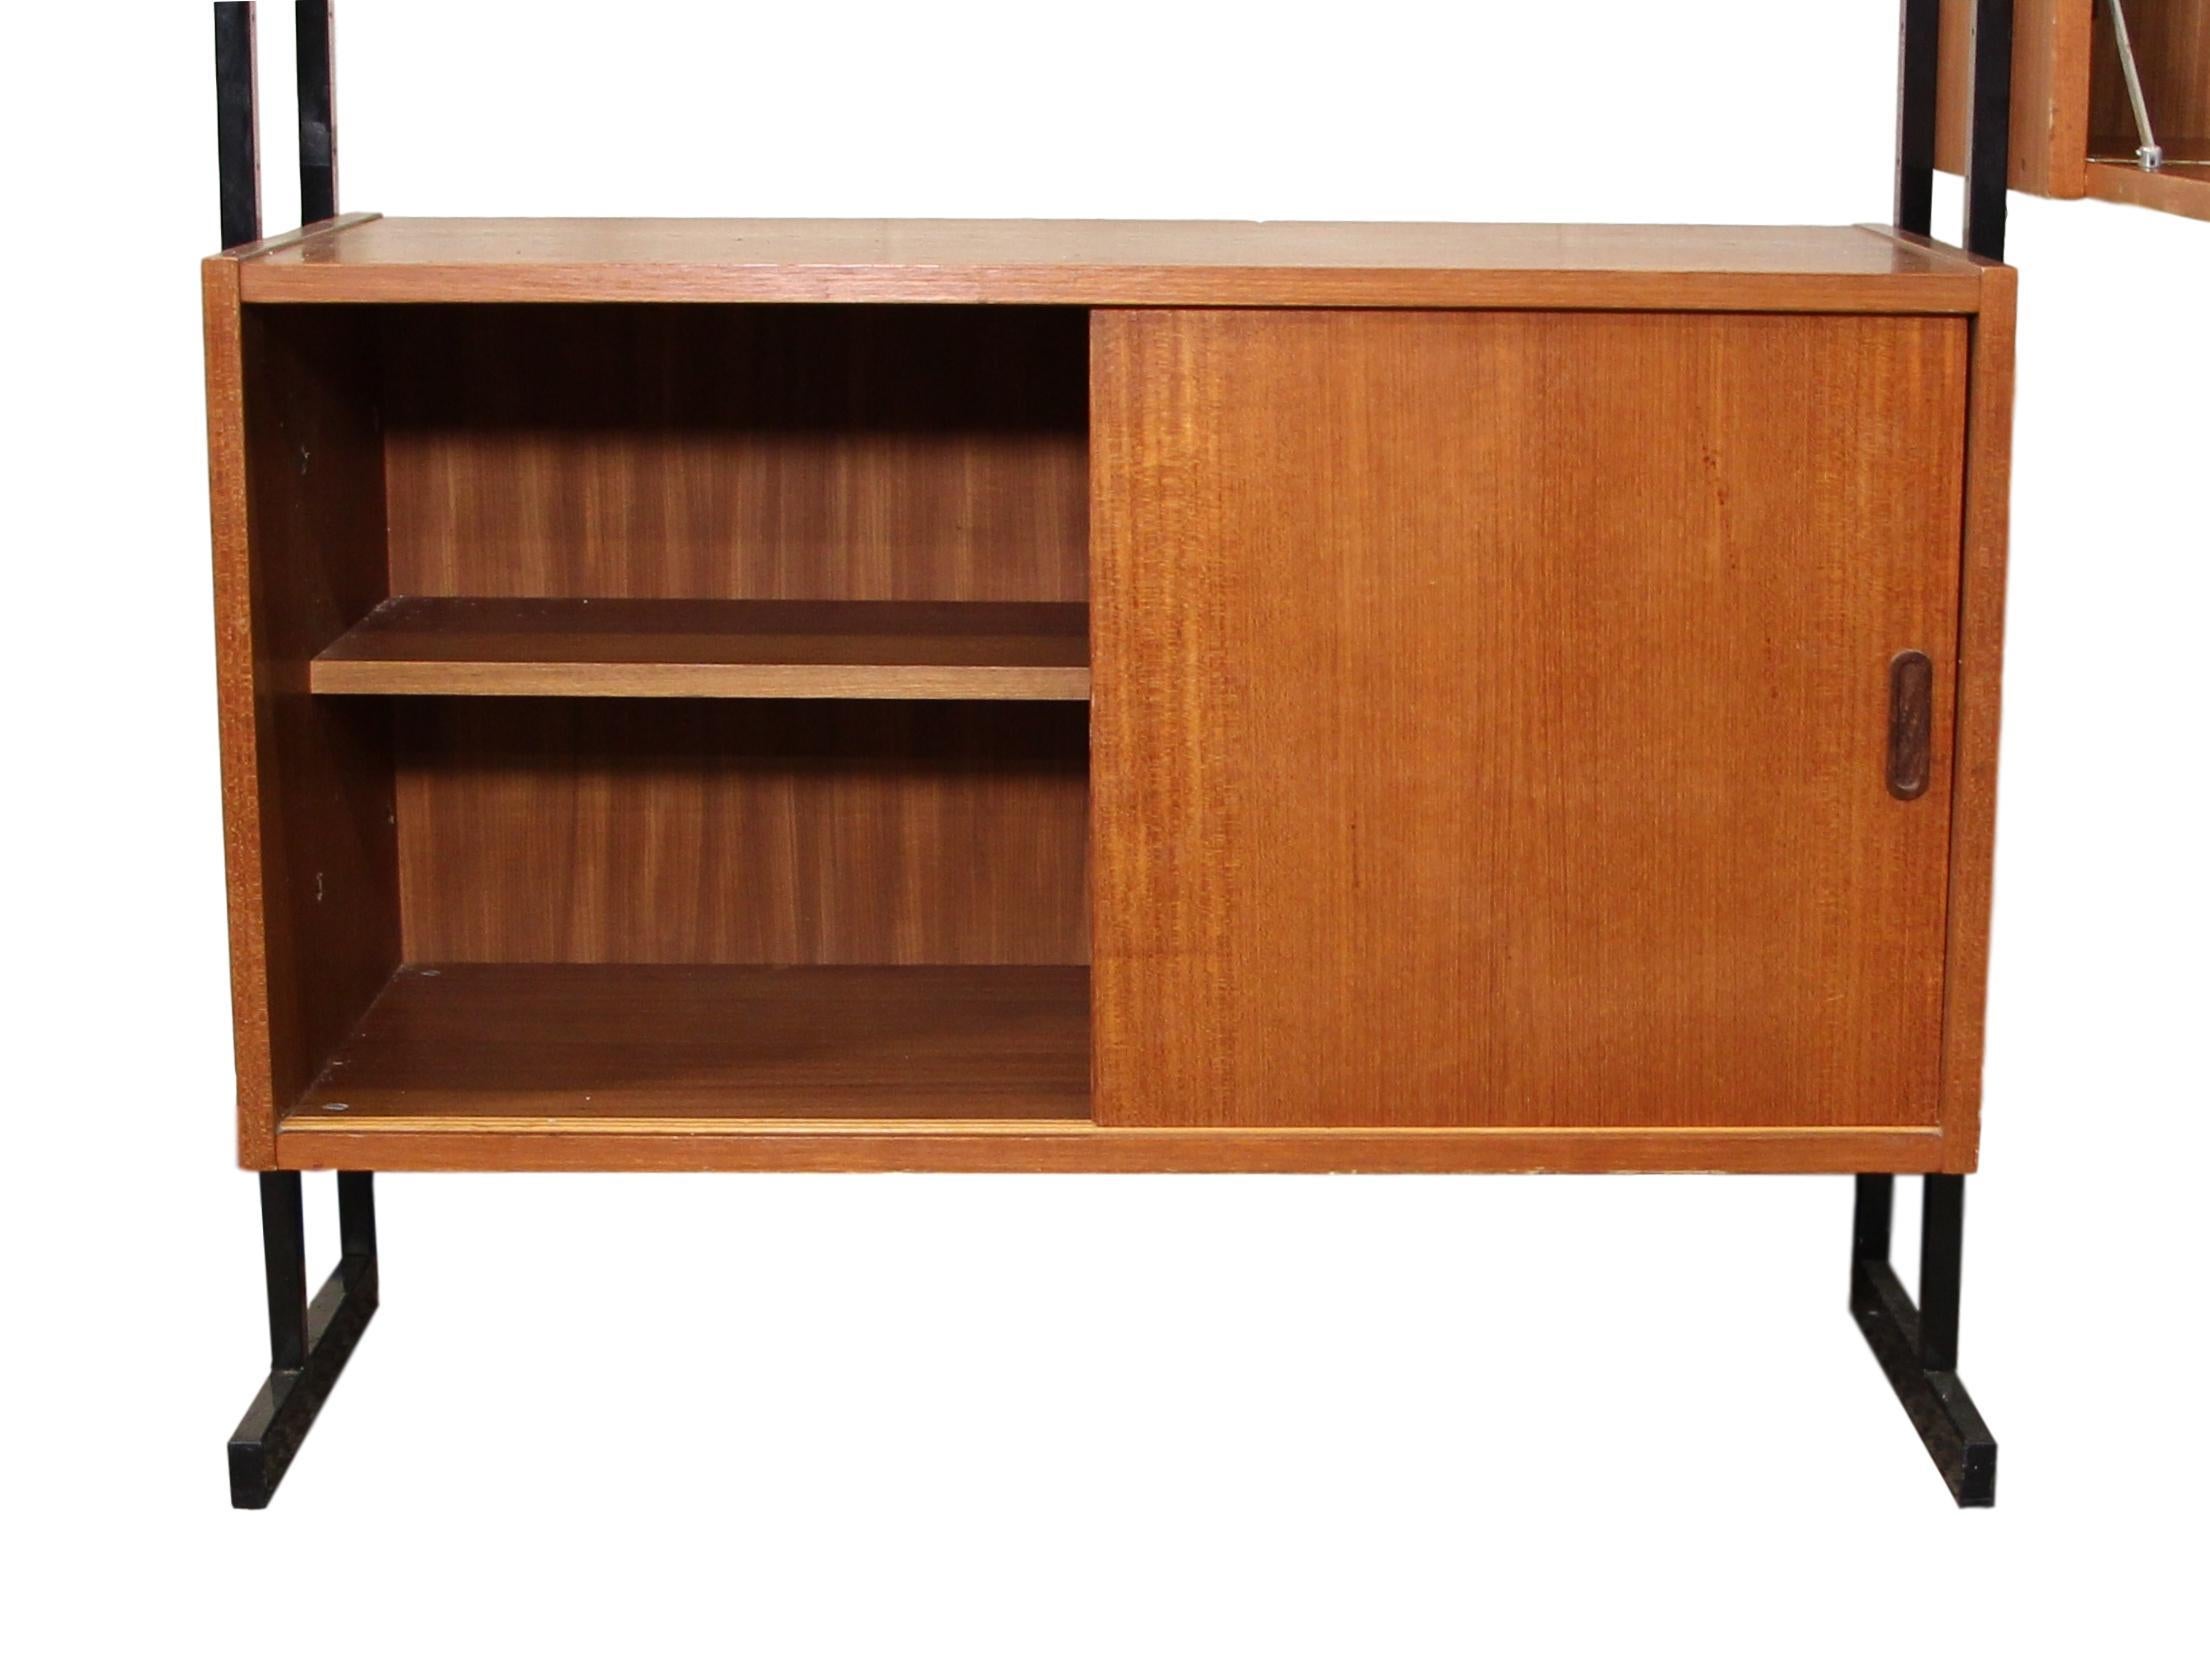 This is a 1960s adjustable 3 bay wall unit made by Interflex, UK, 
The height is fully adjustable. It features 1 top sliding glass door cabinet, 1 sliding door base cabinet, 1 drop down door cabinet, 1 three door cabinet, and 1 shelf. 

Very good